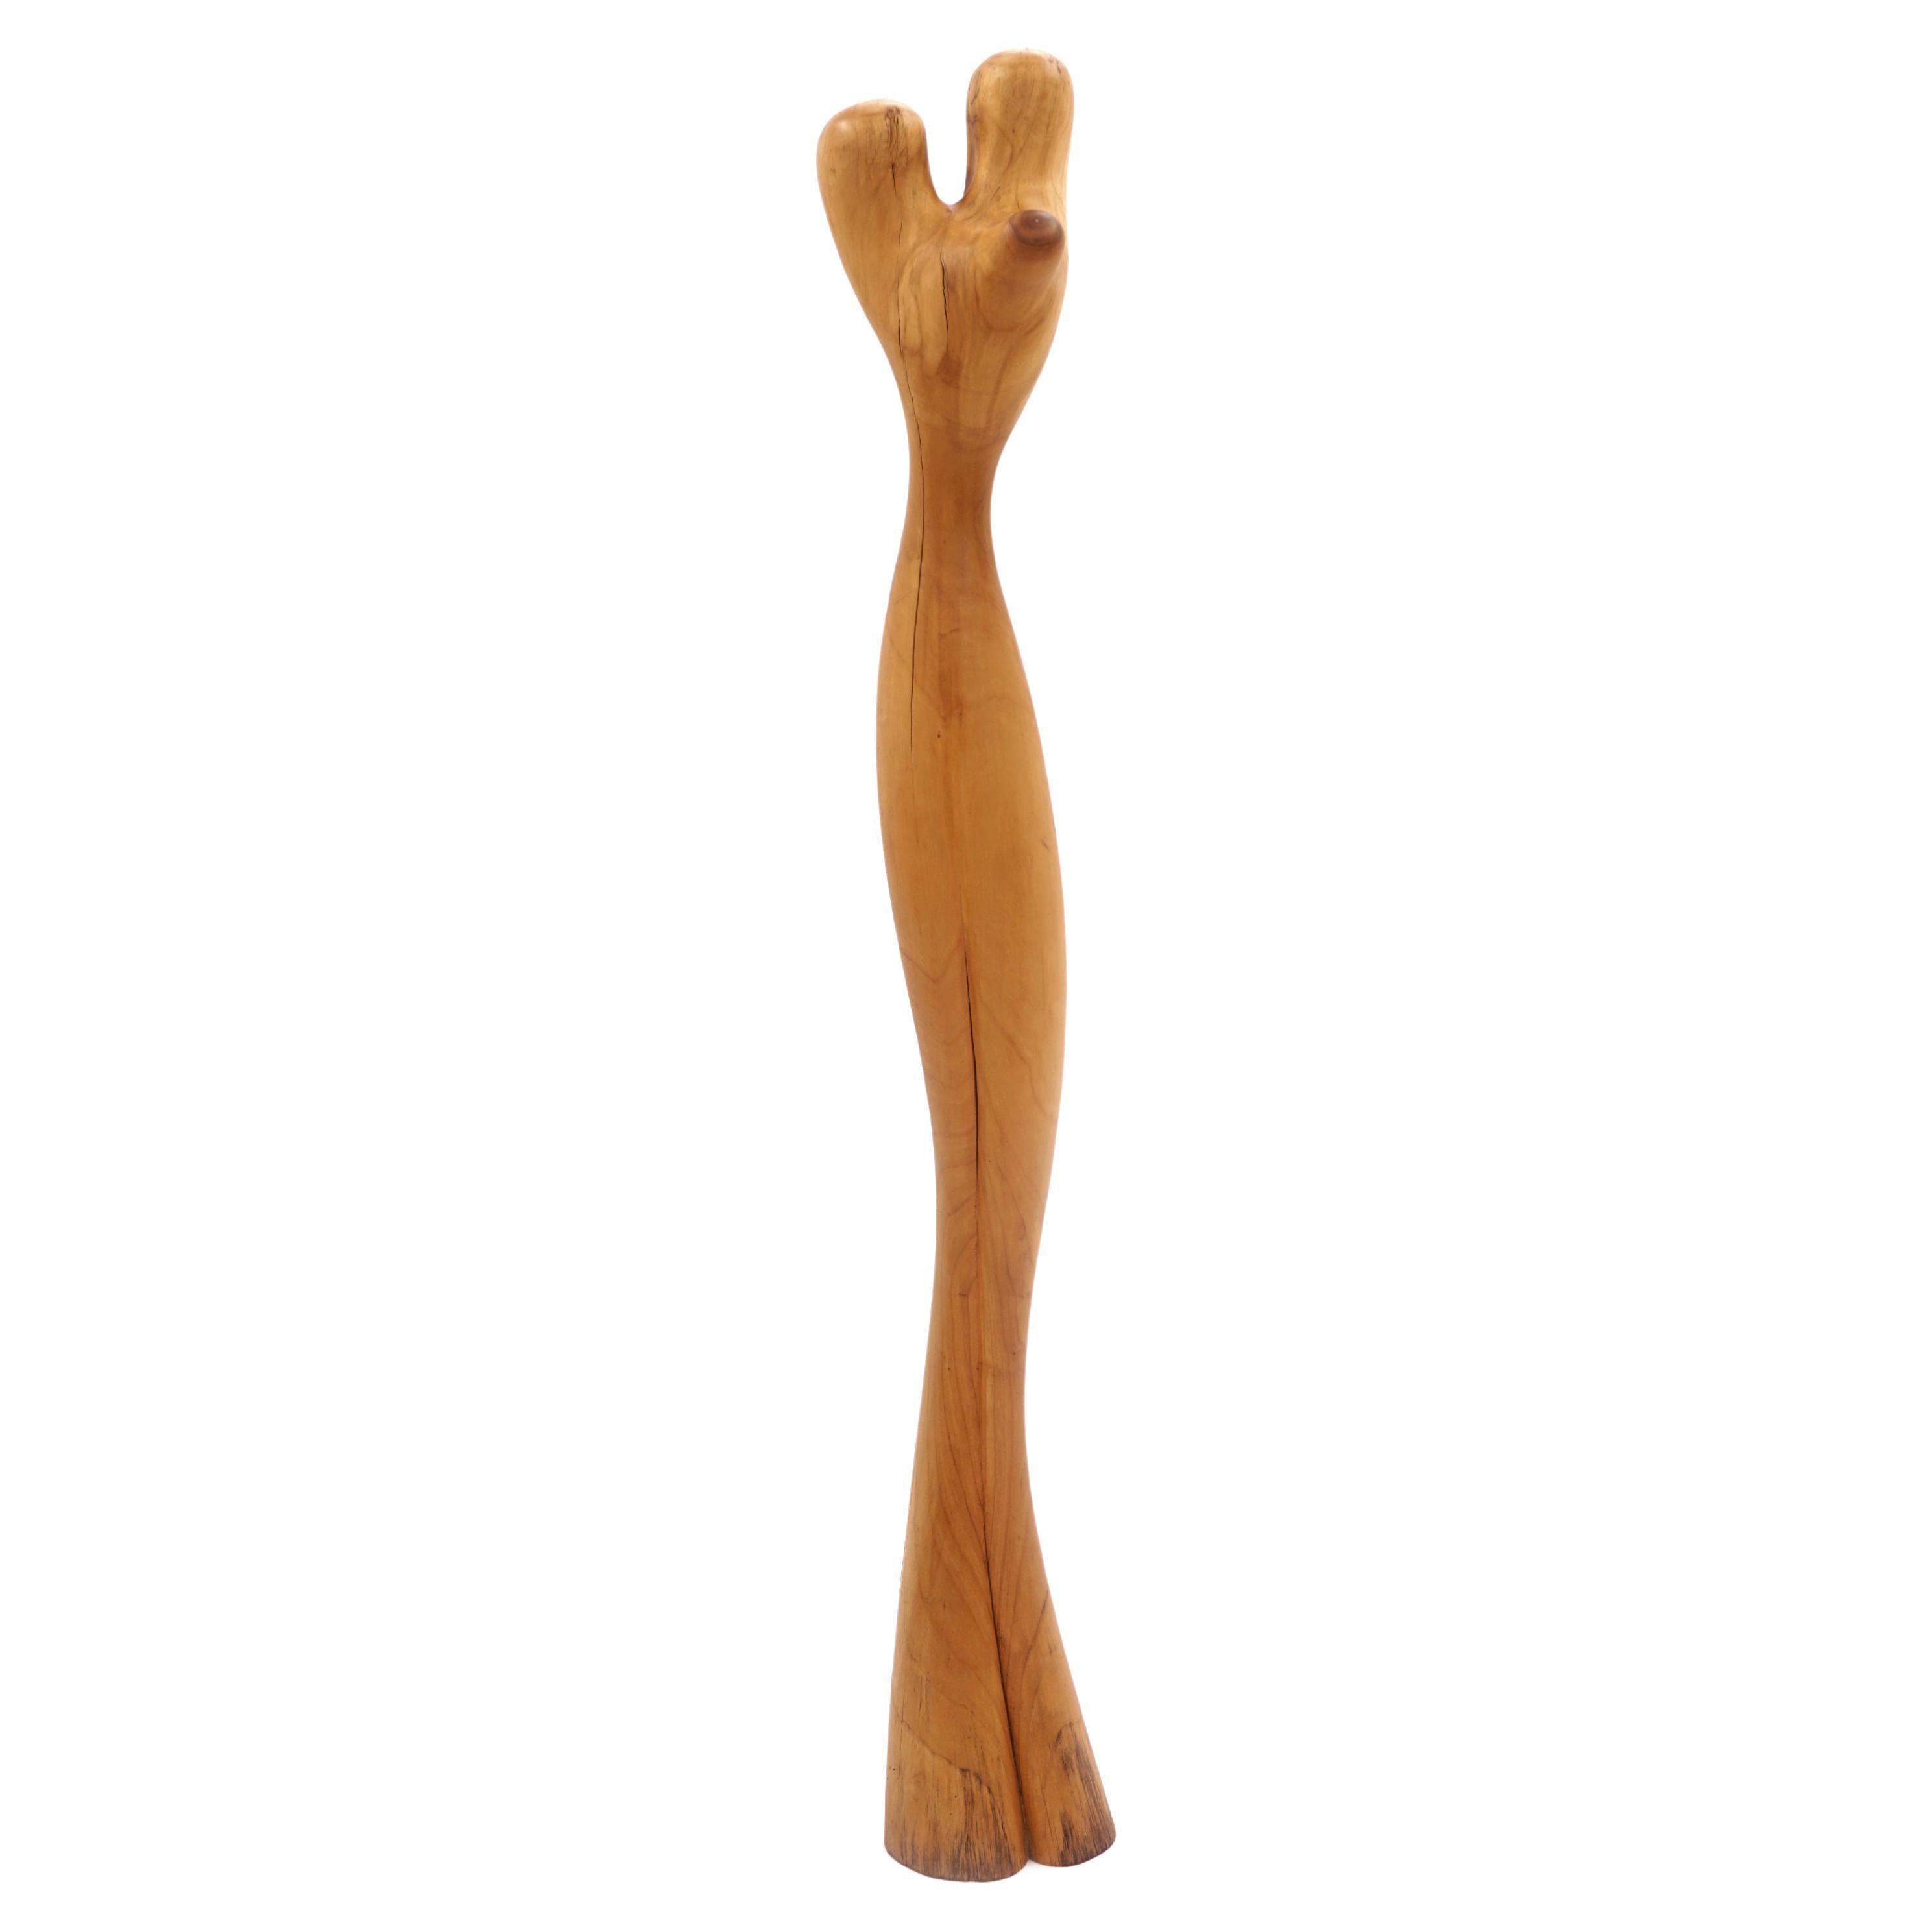 Modern Danish Organic Beech Sculpture by Ulrika Marseen Signed and Dated 1984 For Sale